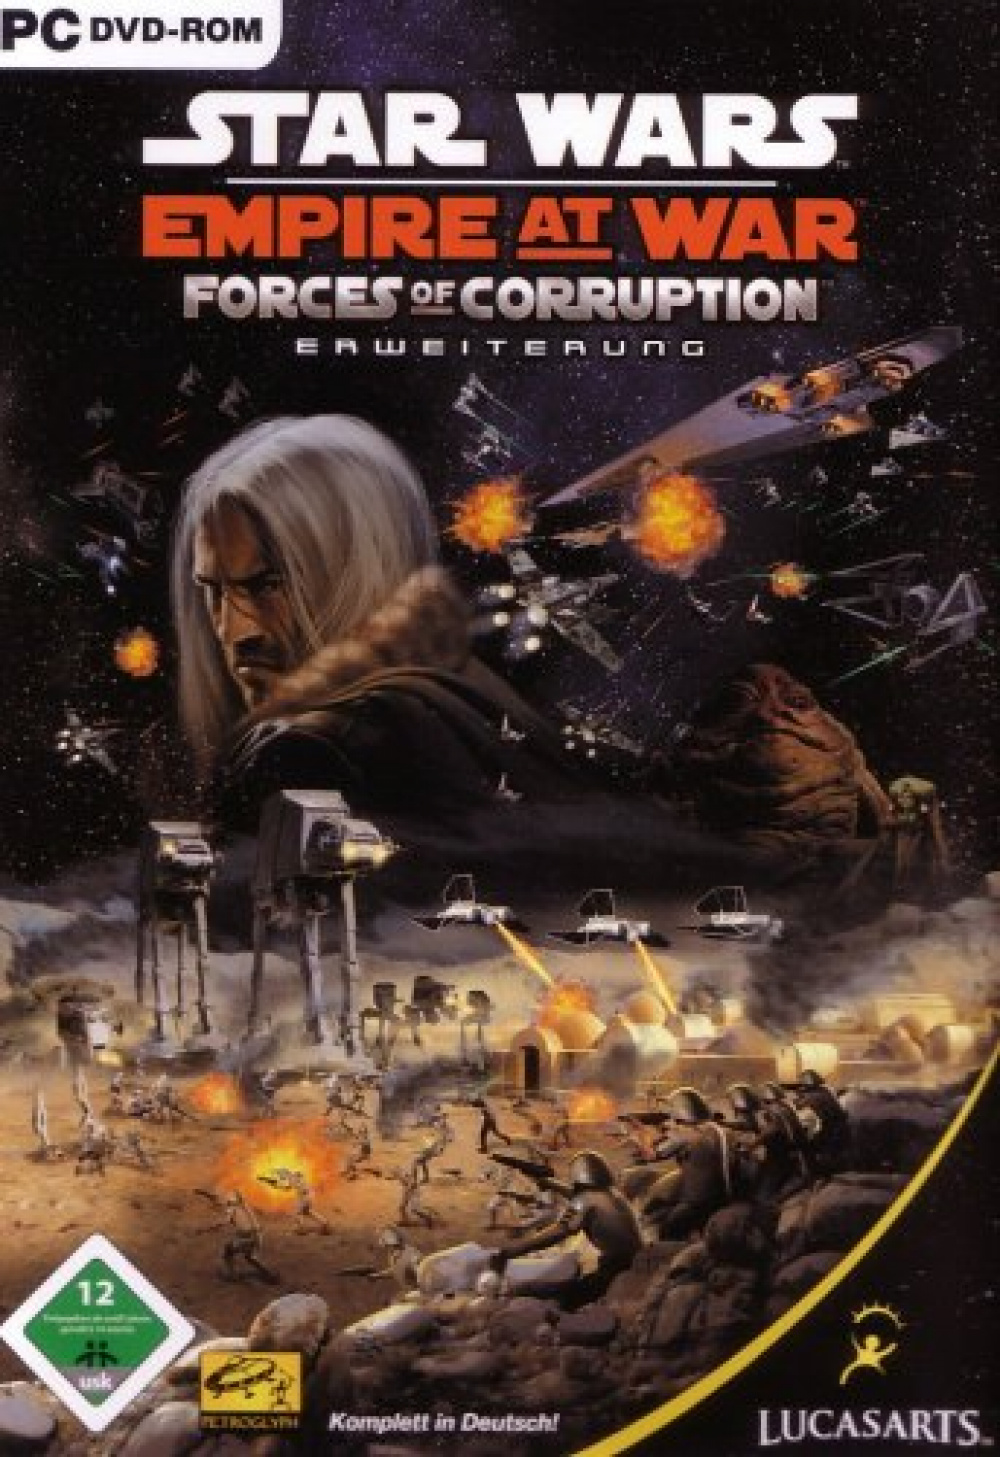 Star Wars: Empire at War - Forces of Corruption | Video Game Reviews Previews PC, PS4, Xbox One and mobile